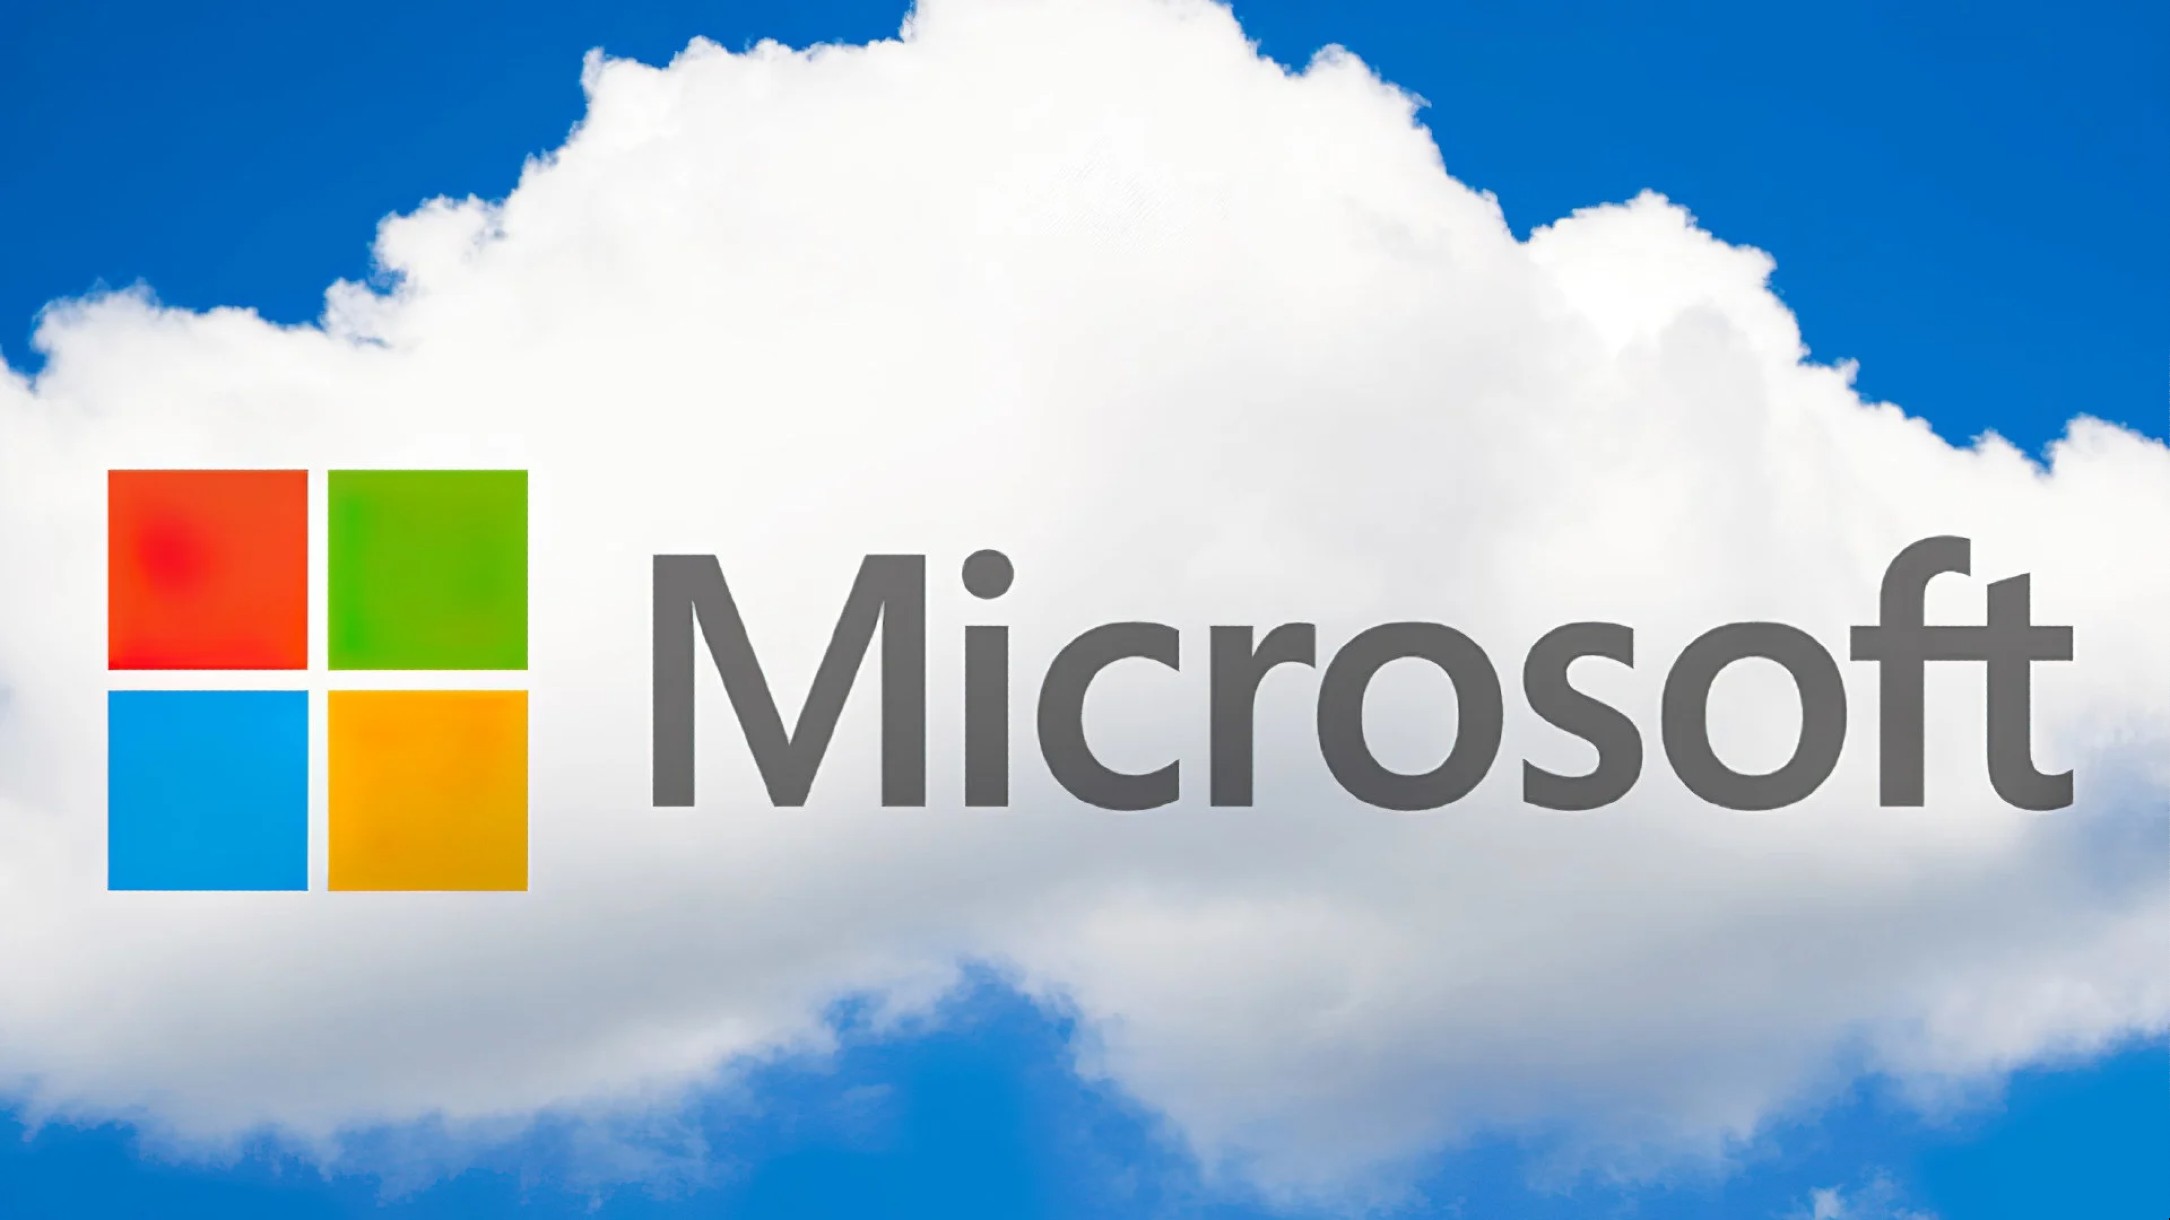 Microsoft titan of the cloud: record numbers in 2022